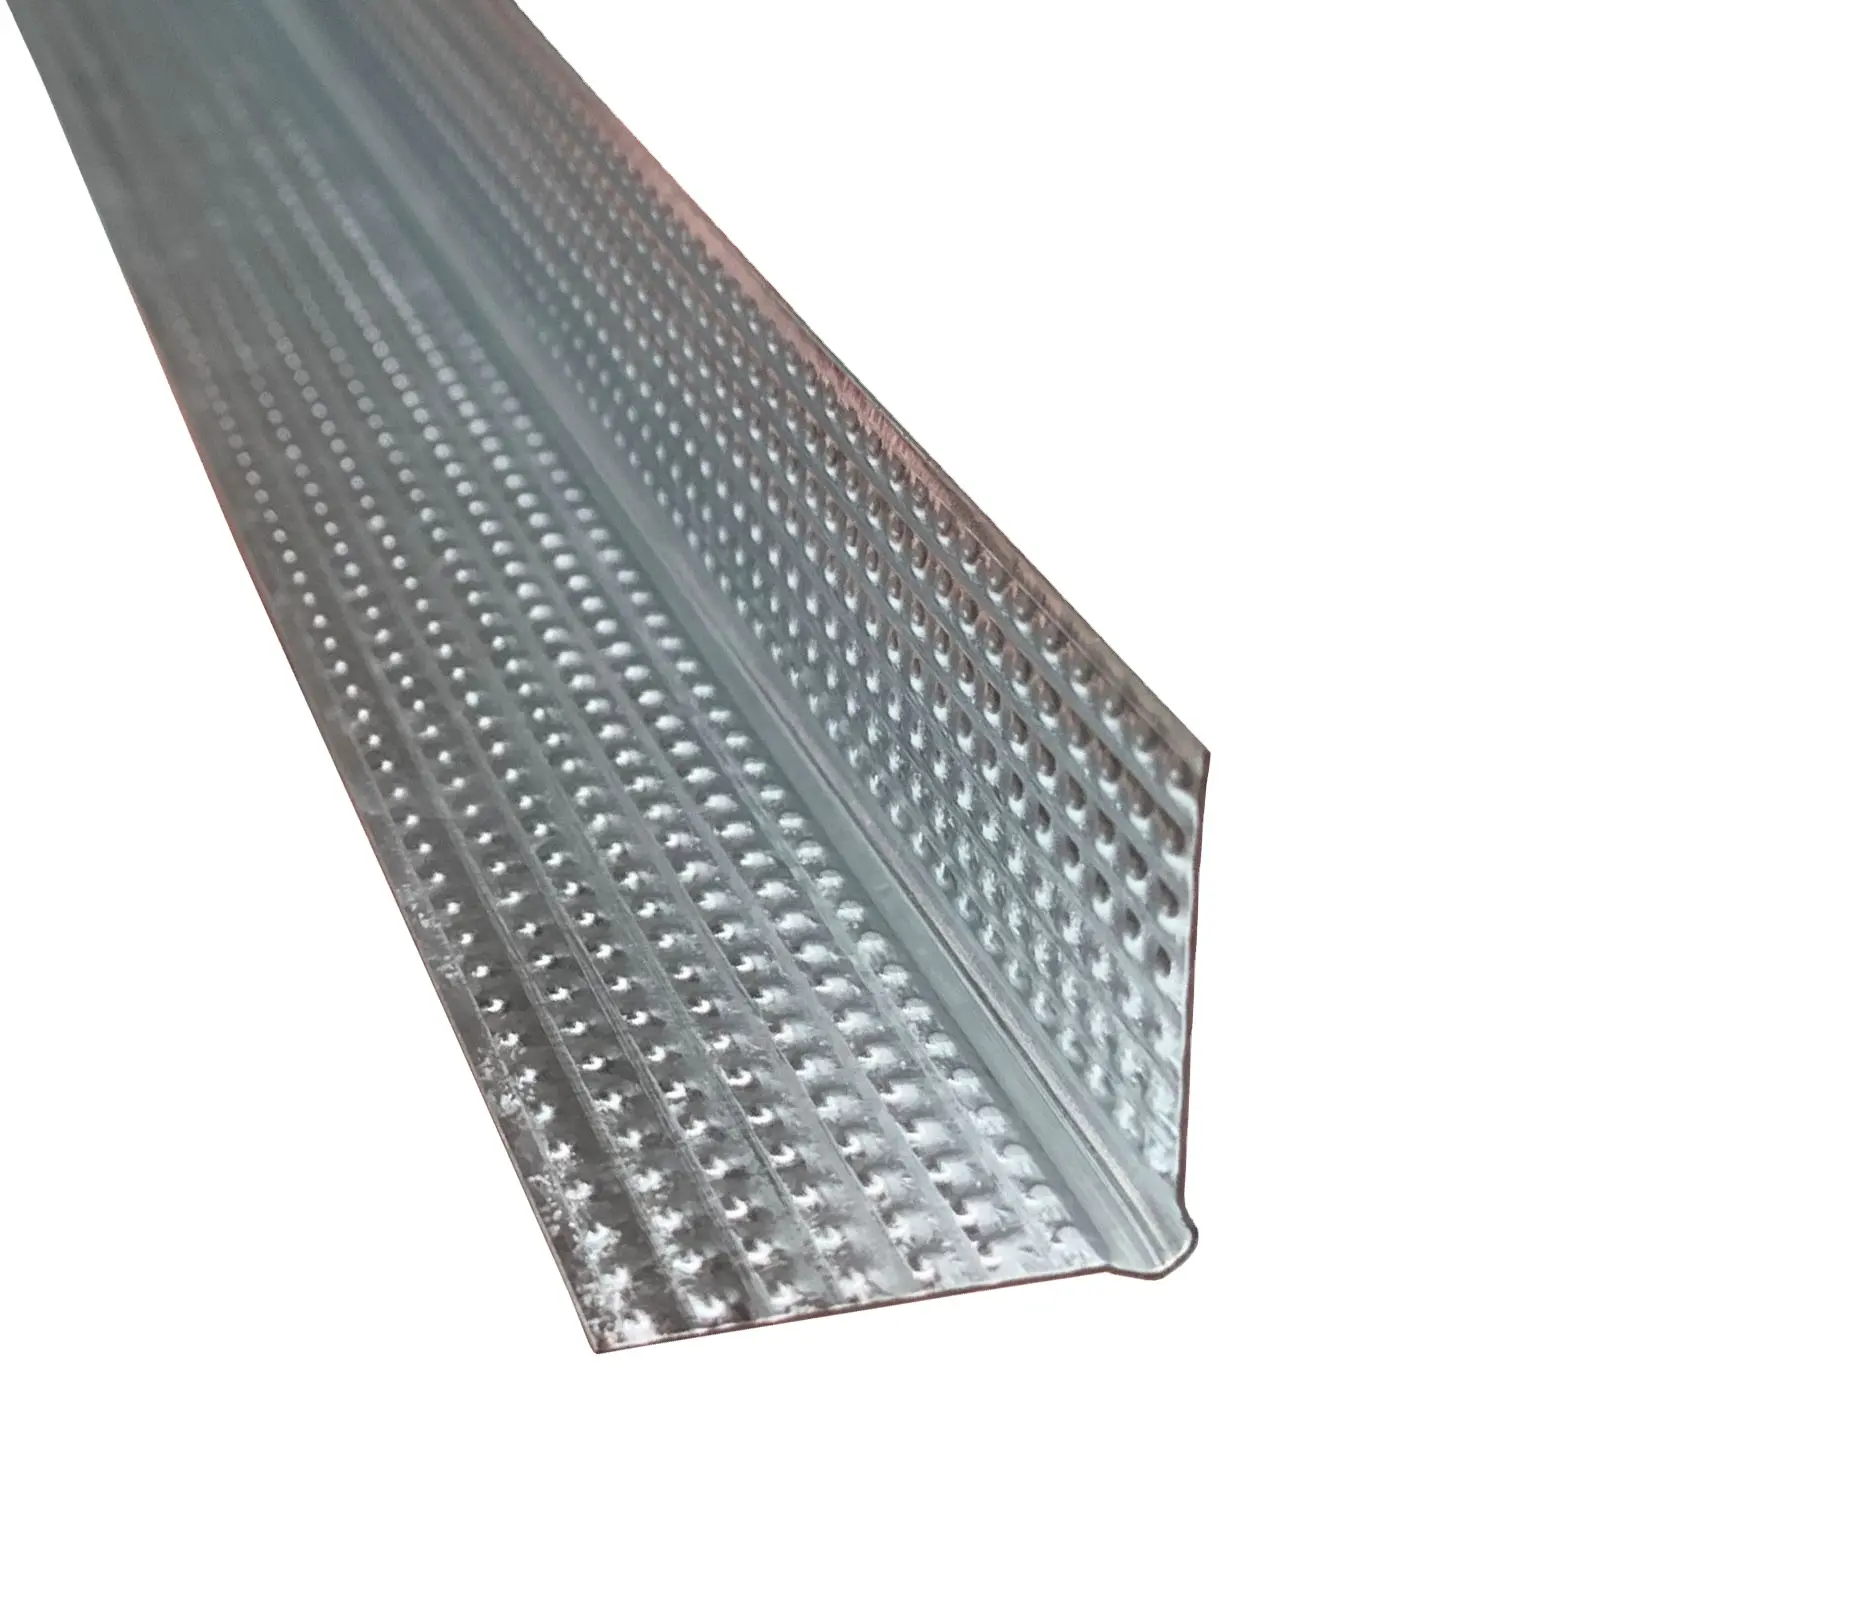 Galvanized steel wall angle ,corner bead for ceilings systems and drywall partition